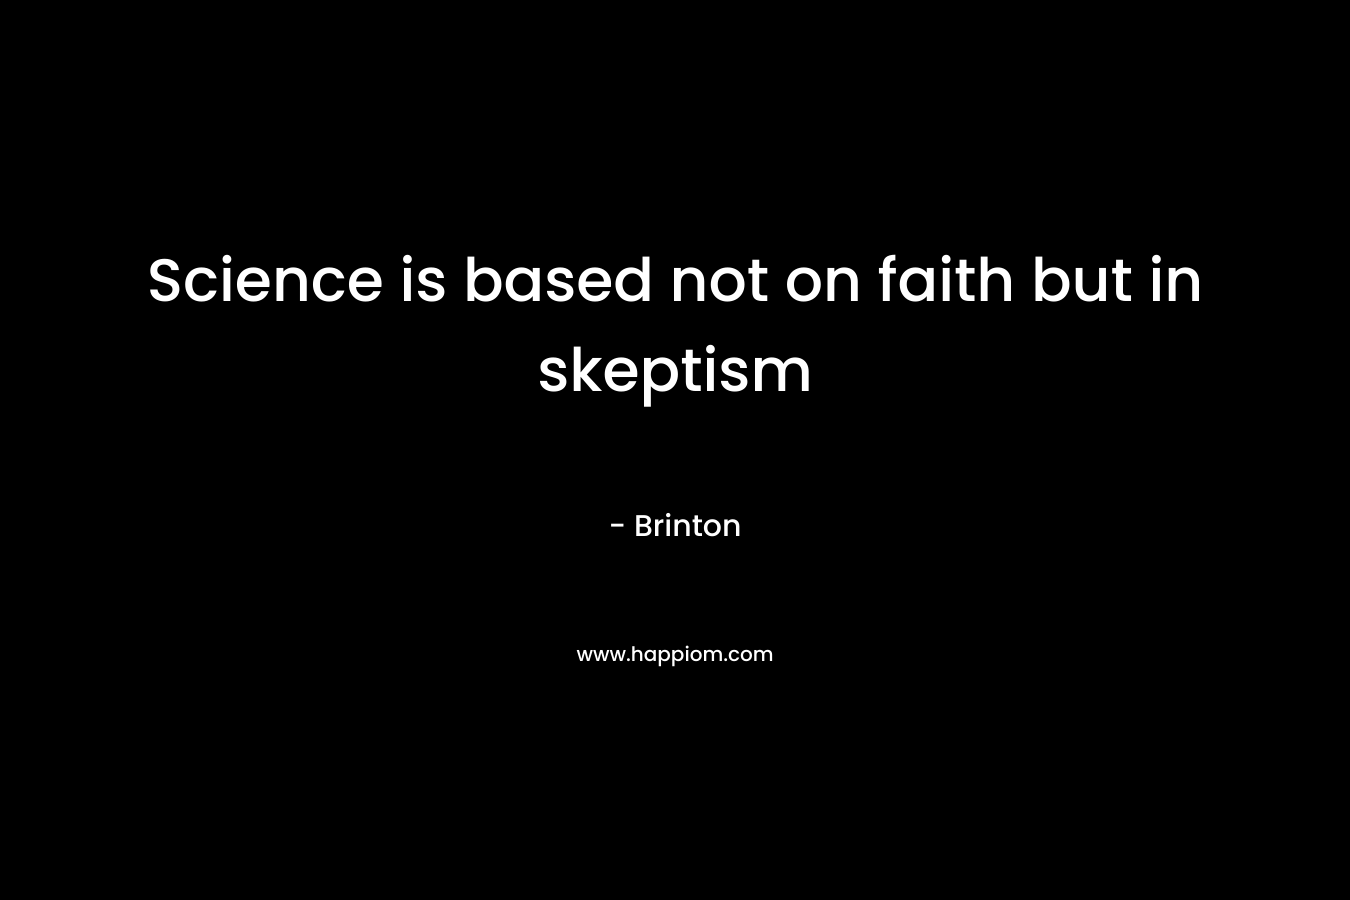 Science is based not on faith but in skeptism